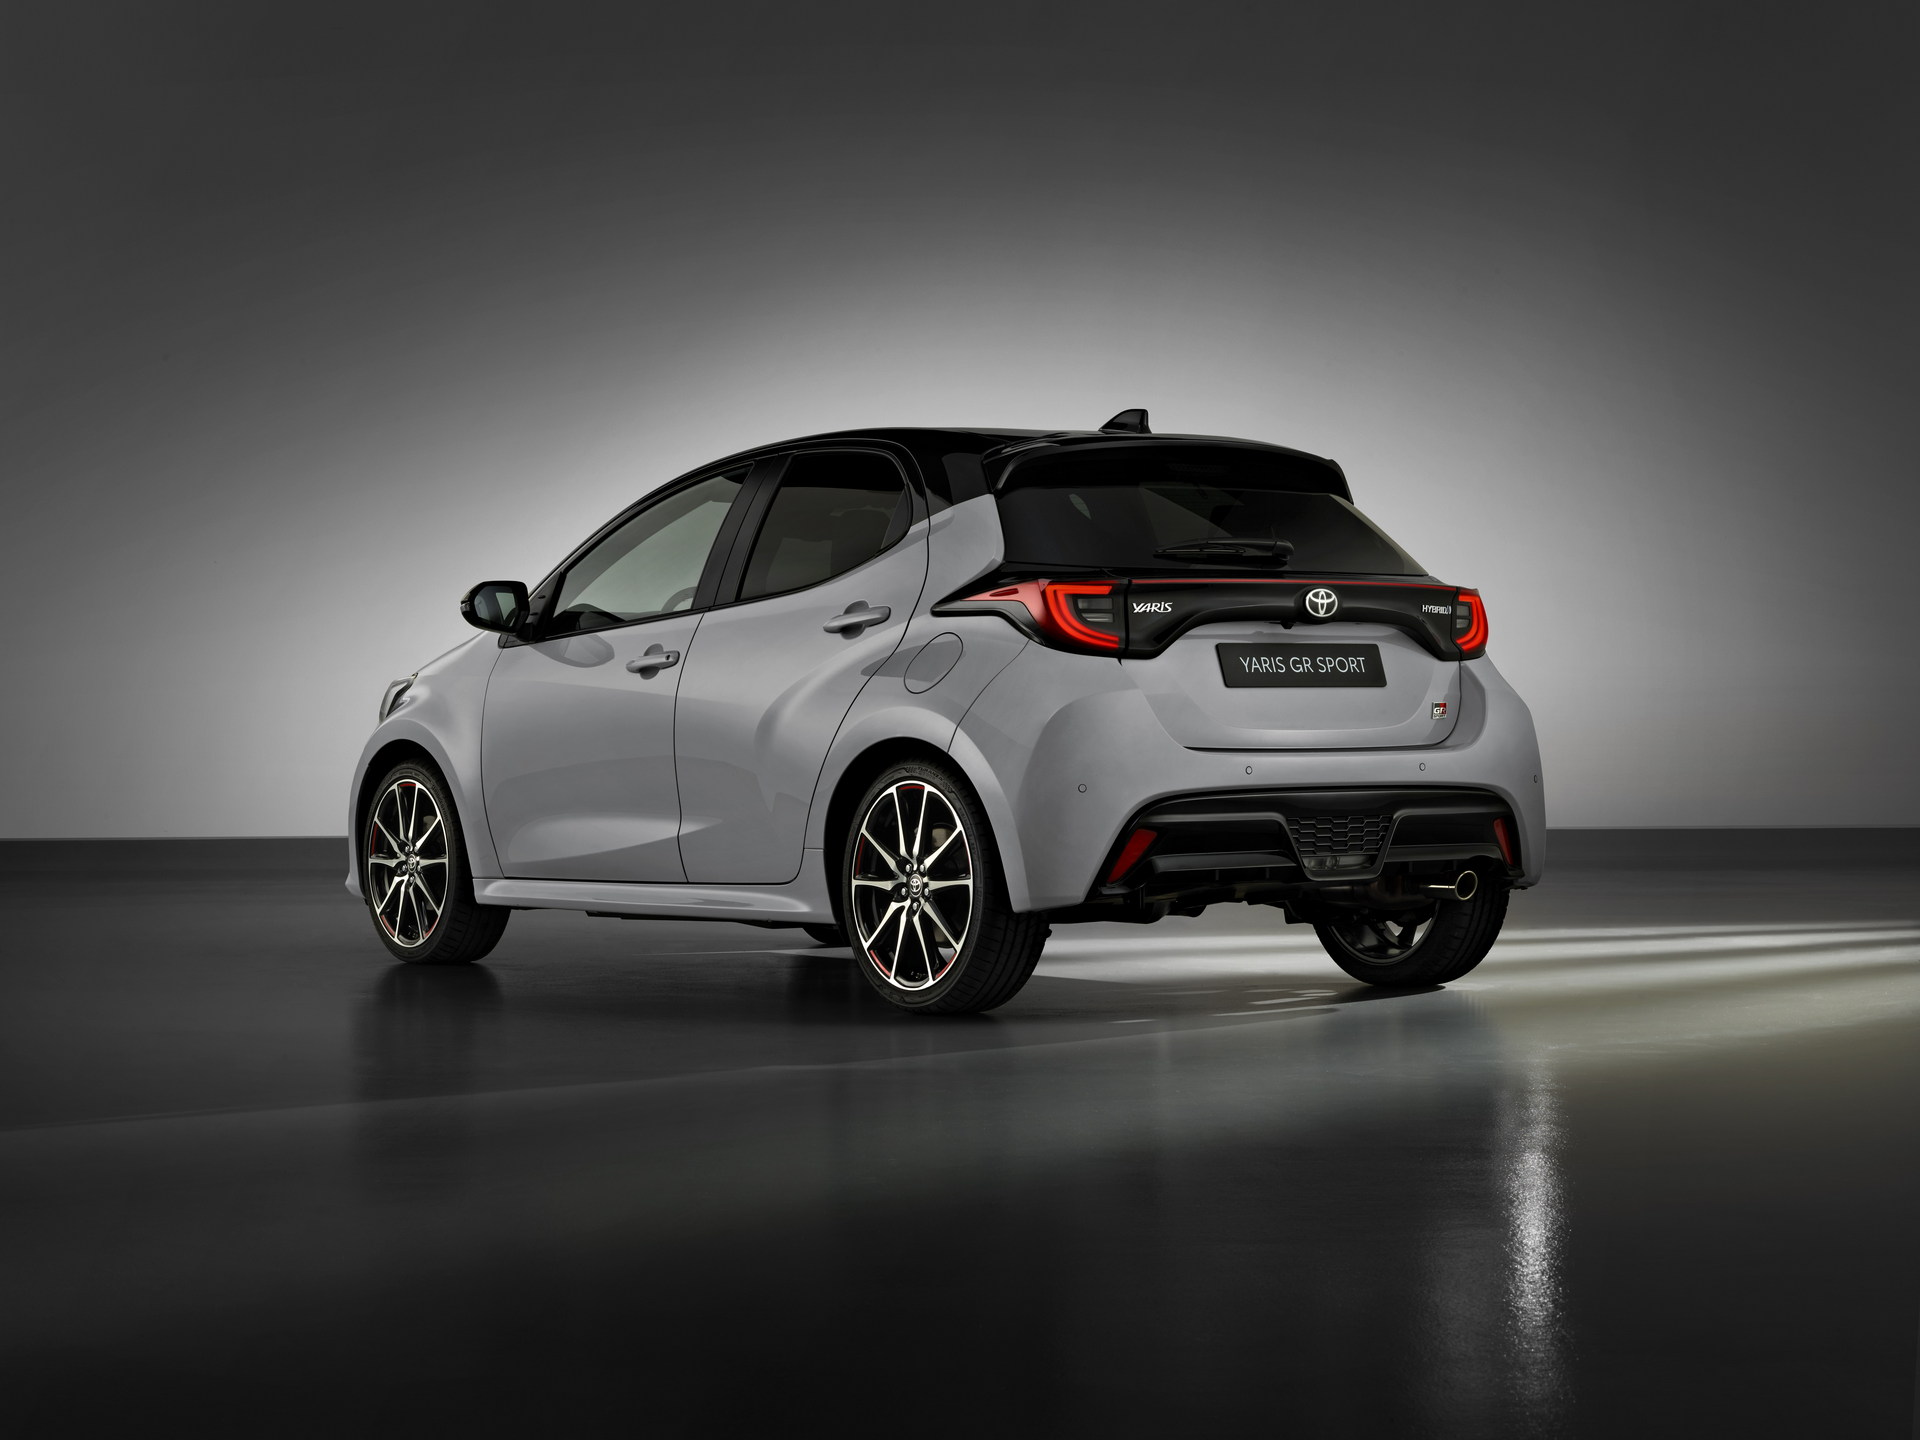 Toyota Yaris GR Sport Brings Spicier Styling And Handling But No Extra Poke